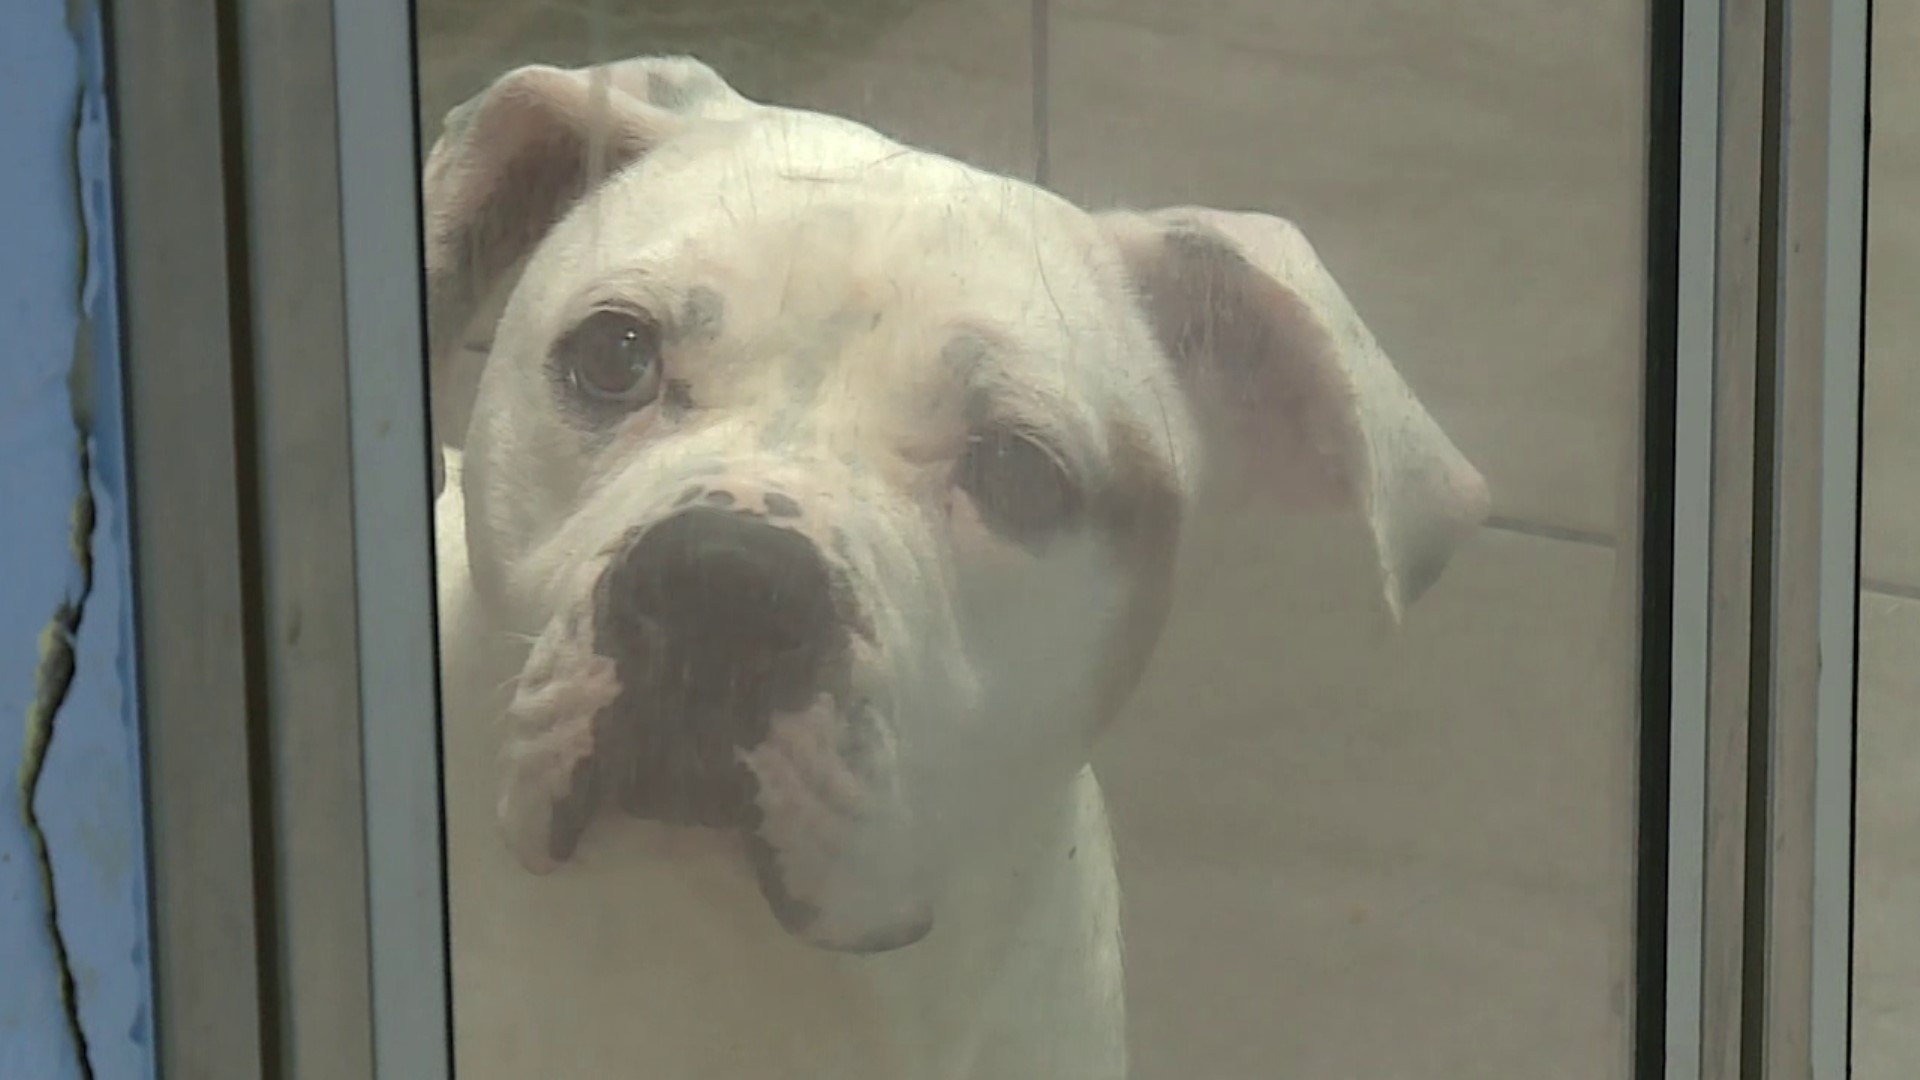 Fayetteville Animal Shelter is running out of room for their dogs, some of who have been sitting inside kennels for months, waiting to be noticed.